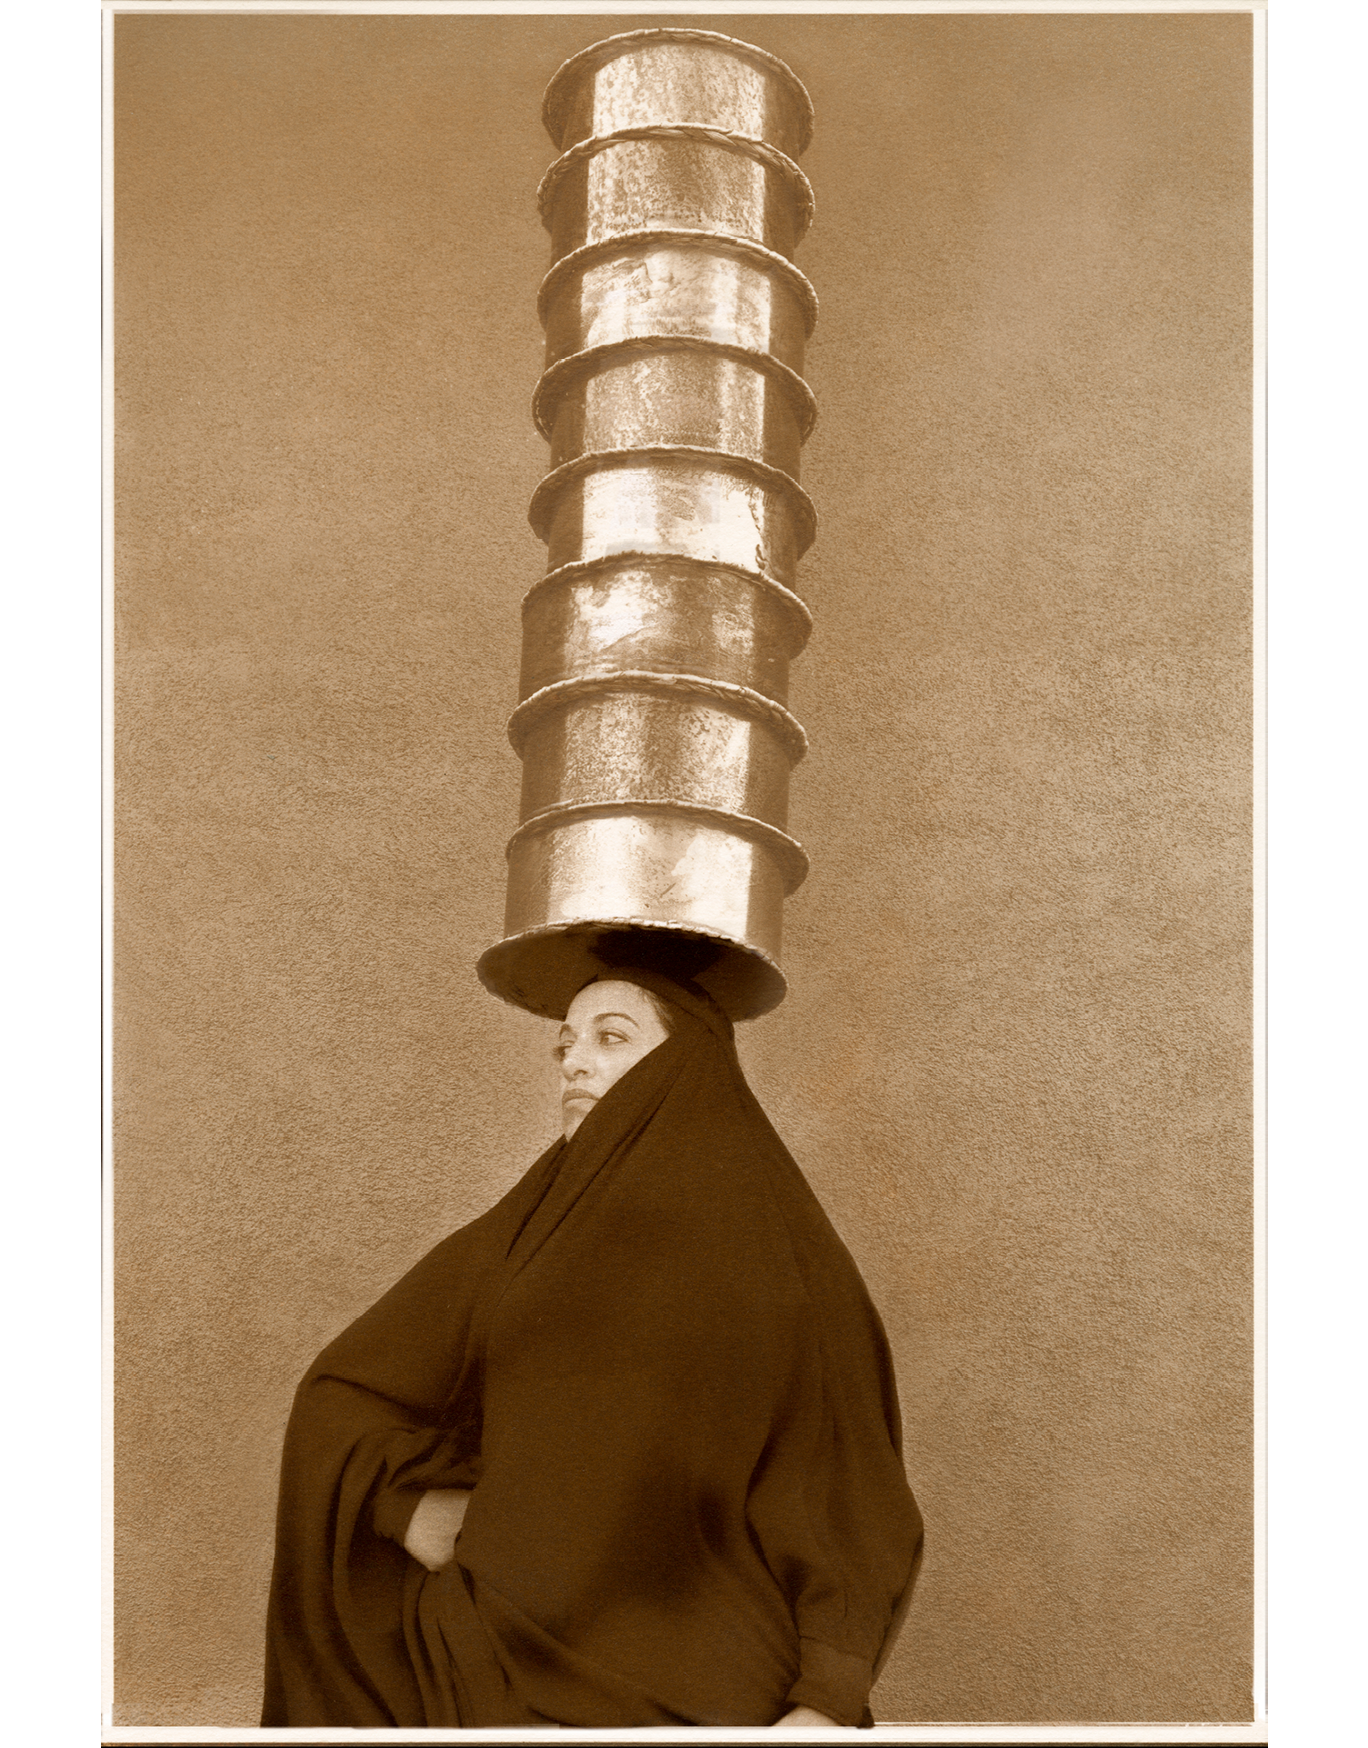 Brown toned photographic portrait of a woman wearing a traditional Iraqi abayya (black garment worn over head and body), with one hand on her hip. On her had, circular pots are stacked over her head.